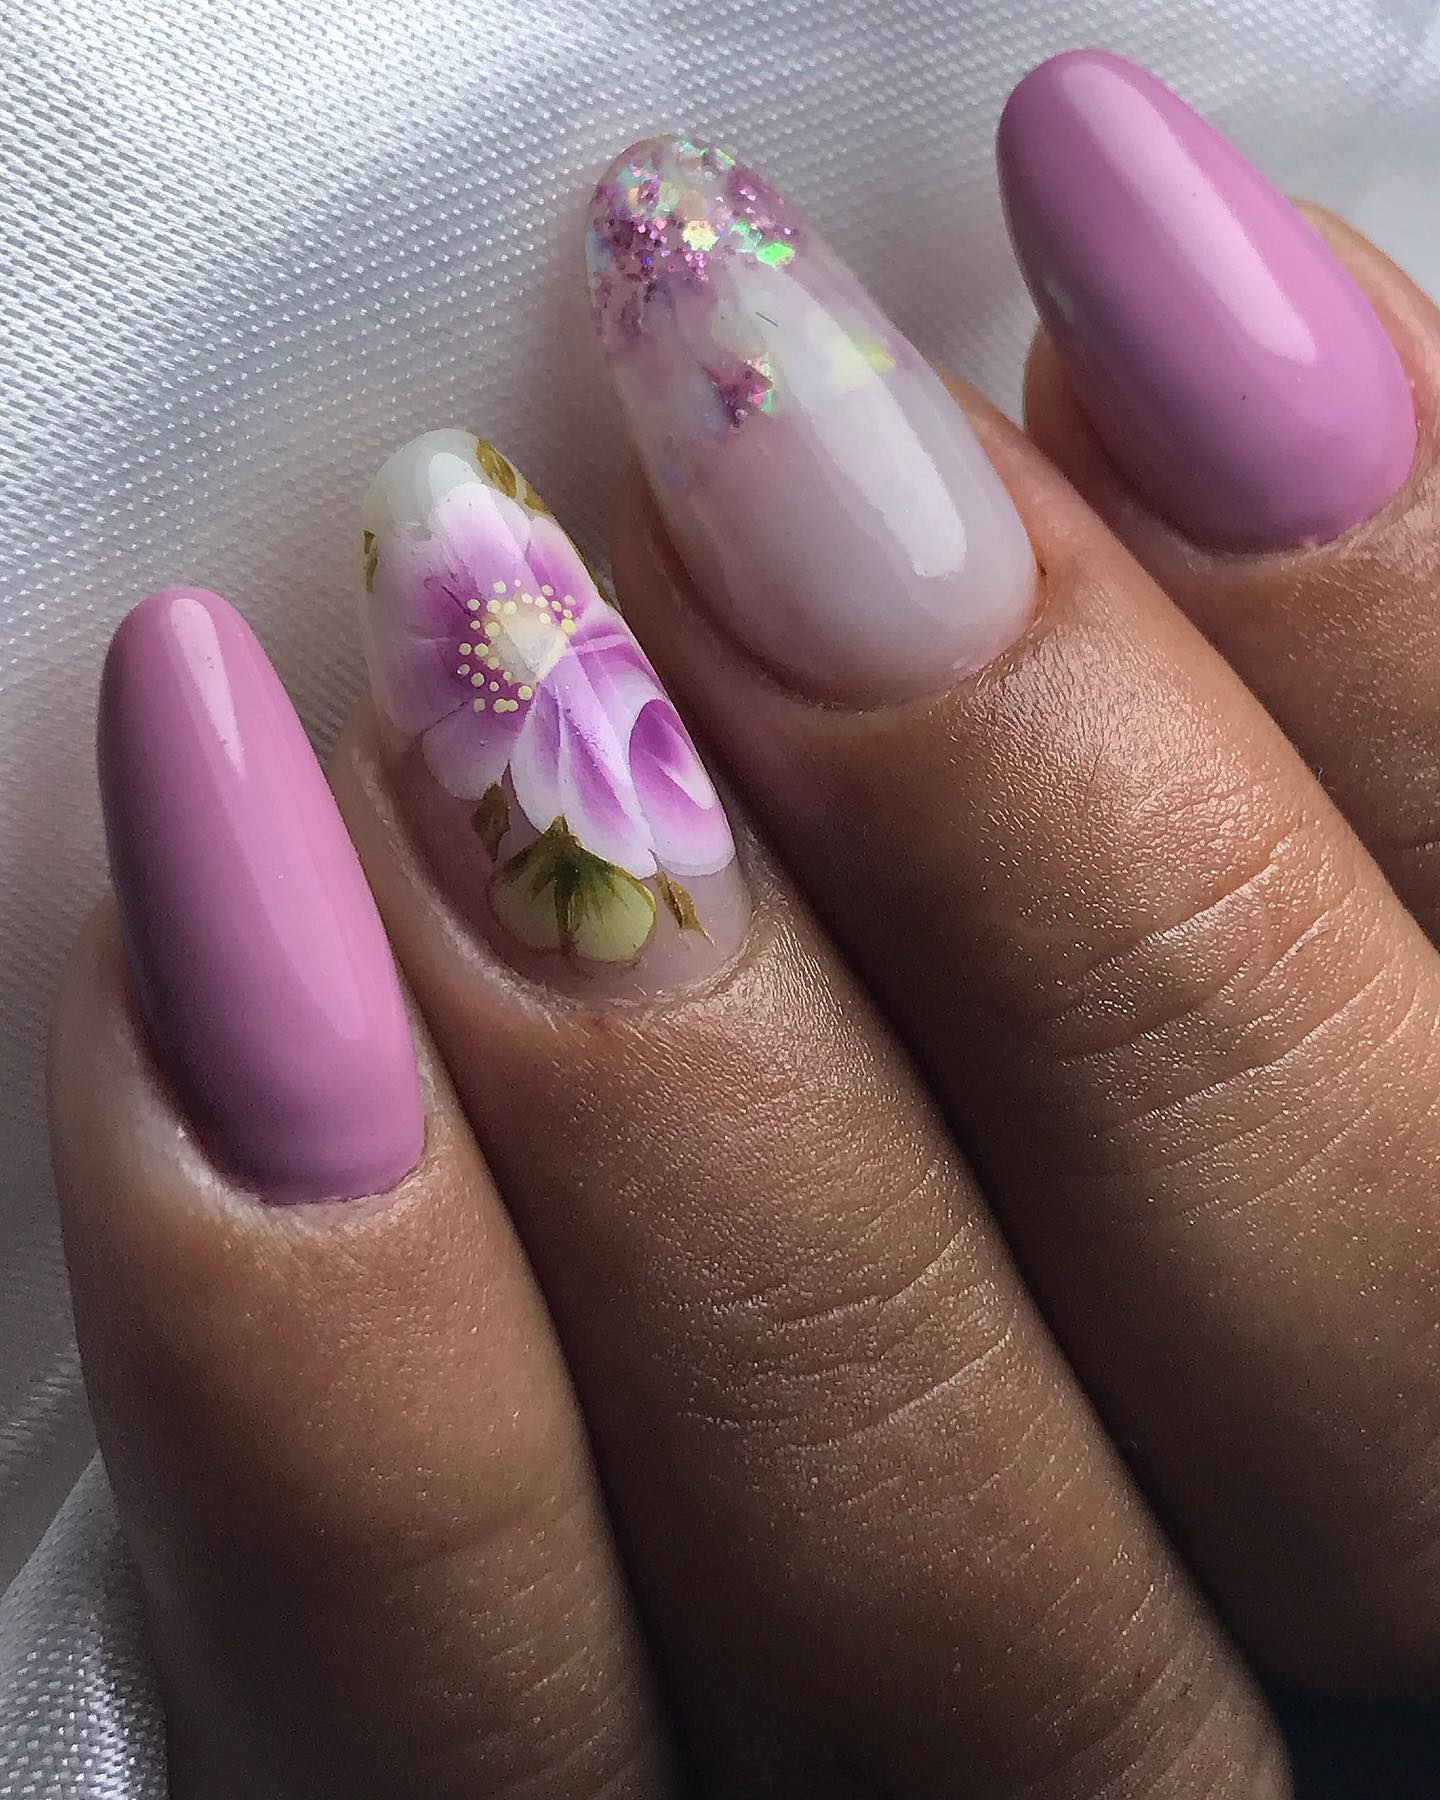 Women who like floral artwork will enjoy this concept. Heads up since you have to have the right type of nail stickers to get this manicure.